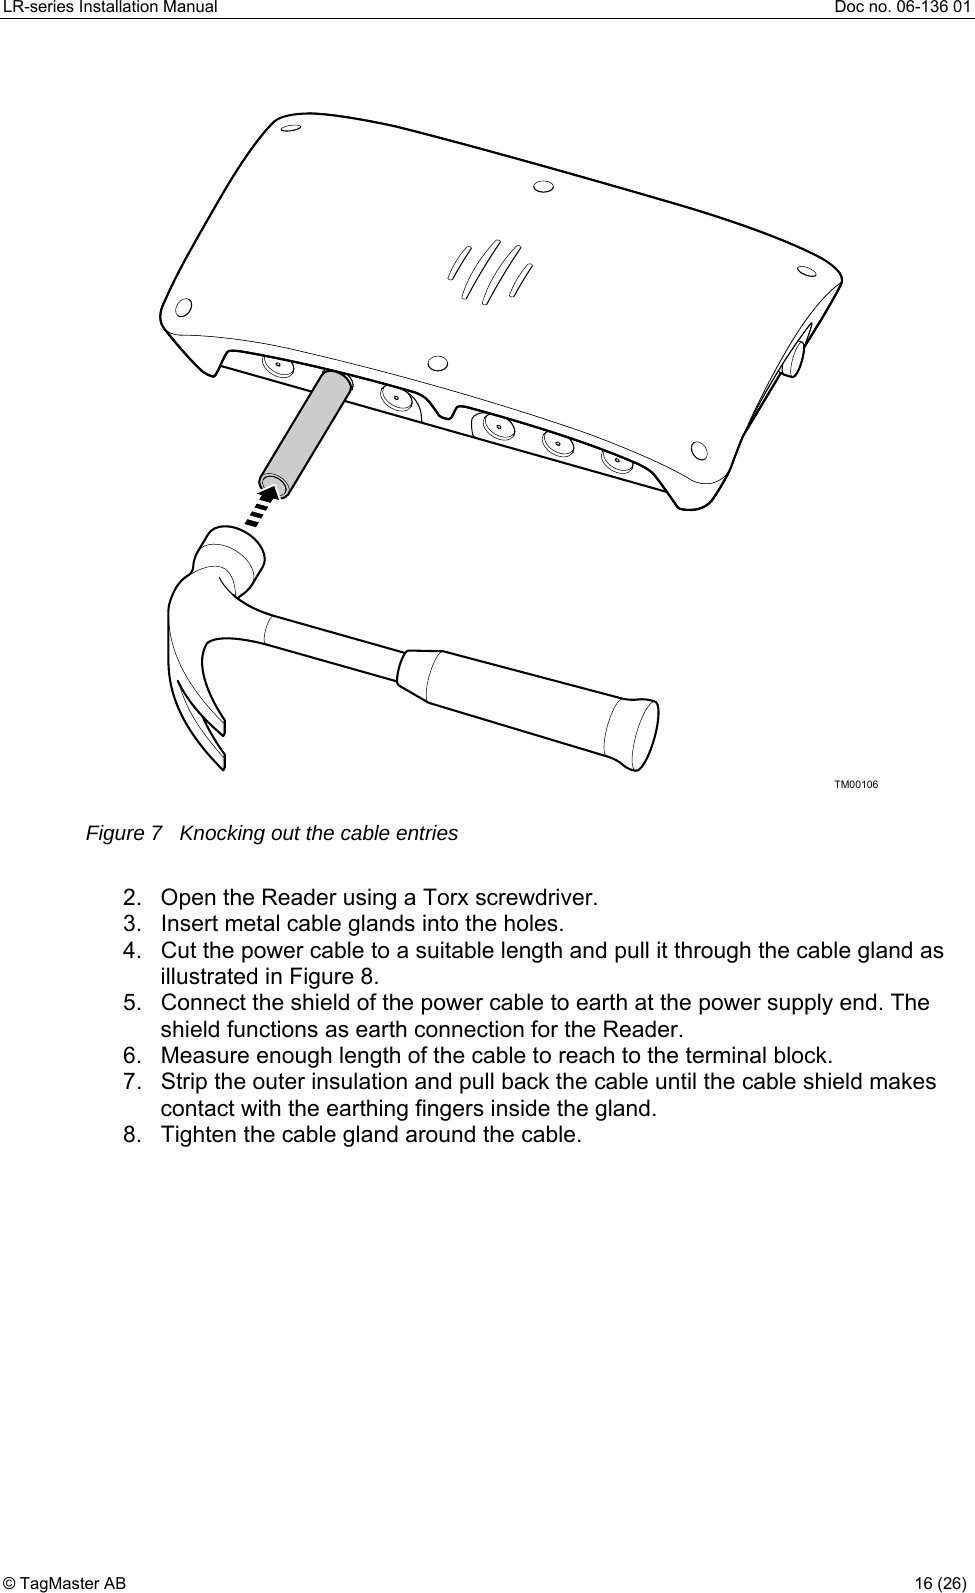 LR-series Installation Manual  Doc no. 06-136 01 TM00106 Figure 7   Knocking out the cable entries  2.  Open the Reader using a Torx screwdriver. 3.  Insert metal cable glands into the holes. 4.  Cut the power cable to a suitable length and pull it through the cable gland as illustrated in Figure 8.  5.  Connect the shield of the power cable to earth at the power supply end. The shield functions as earth connection for the Reader. 6.  Measure enough length of the cable to reach to the terminal block. 7.  Strip the outer insulation and pull back the cable until the cable shield makes contact with the earthing fingers inside the gland. 8.  Tighten the cable gland around the cable. © TagMaster AB  16 (26)   